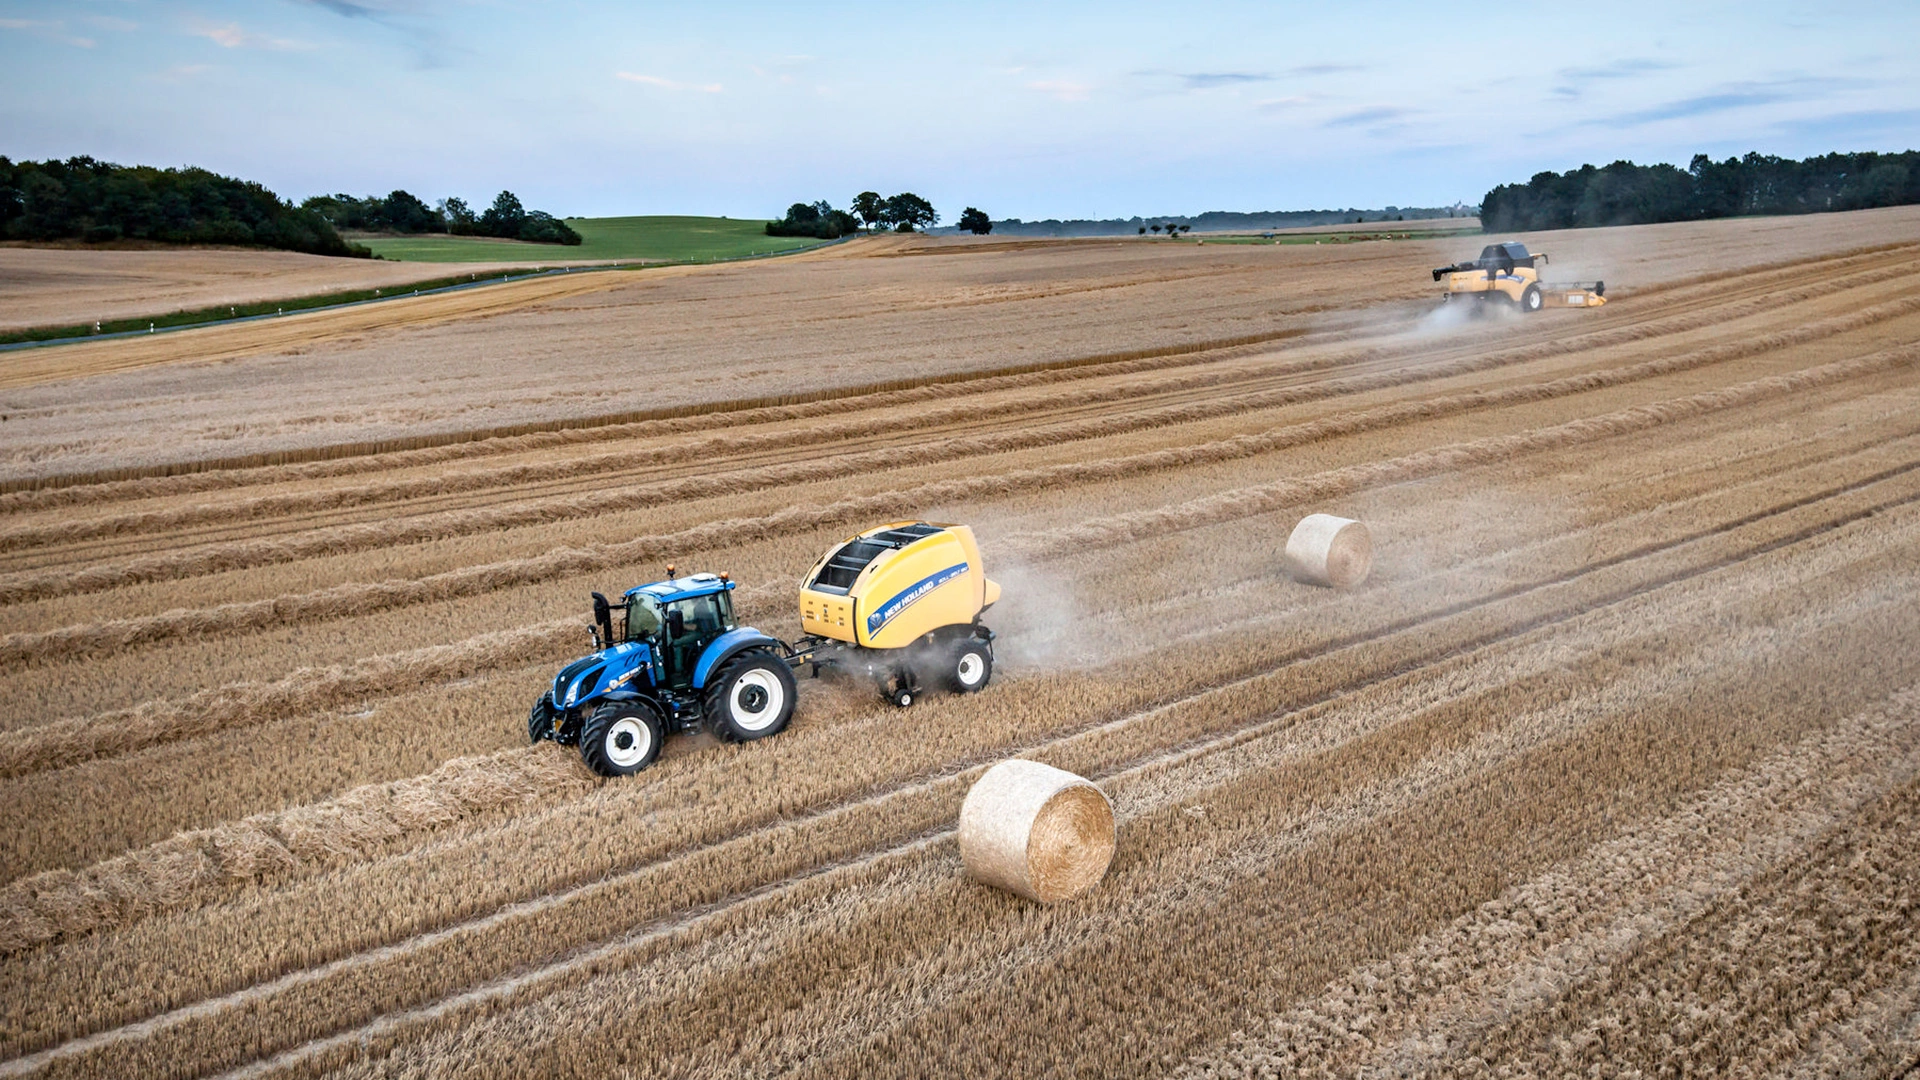 Tractor in action, operating a Roll-Belt round baler on an expansive agricultural field